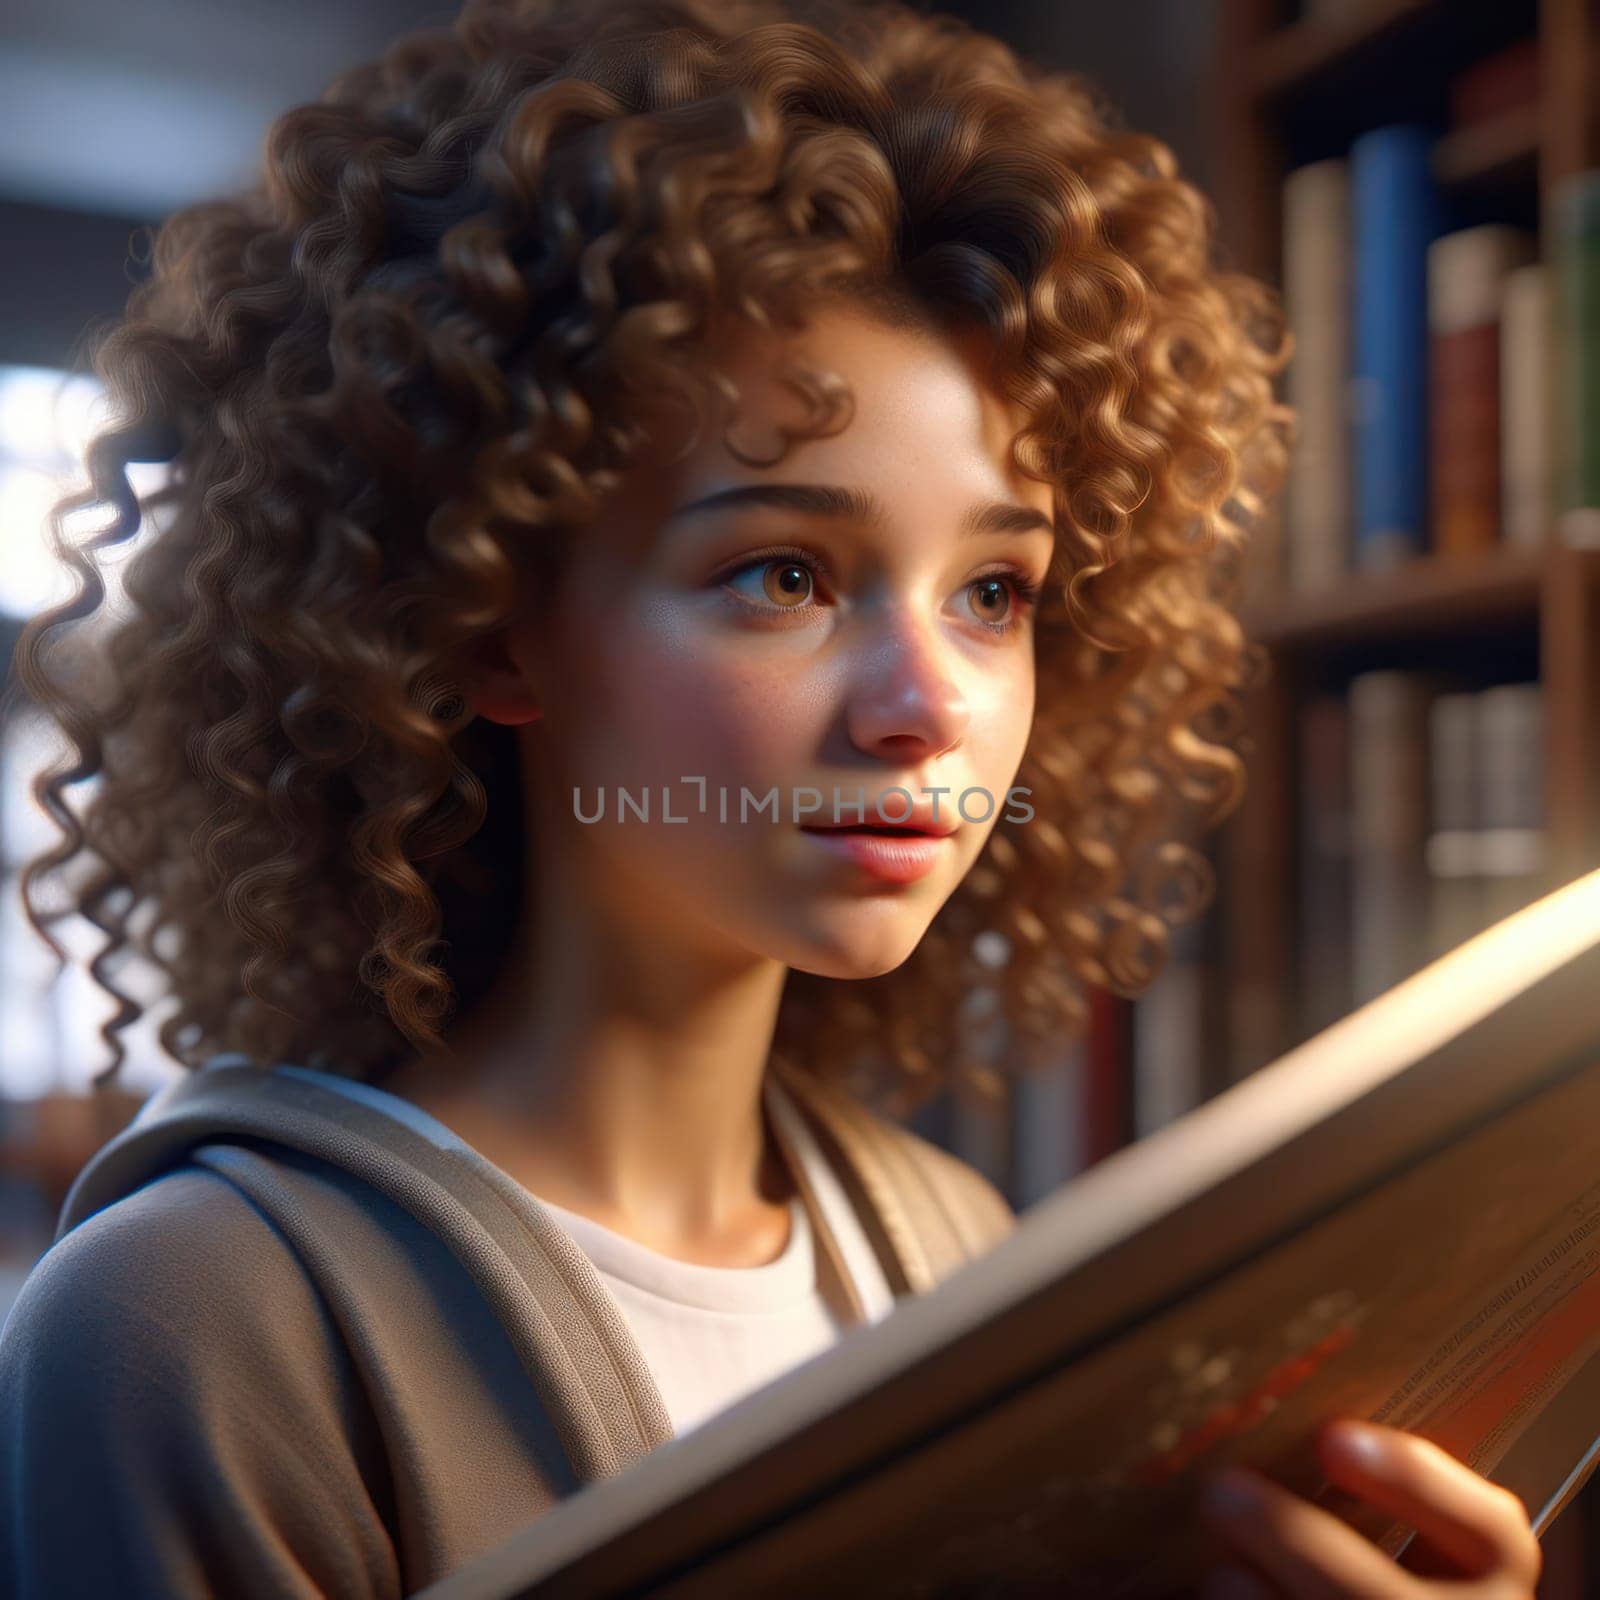 Girl with a book. Image created by AI